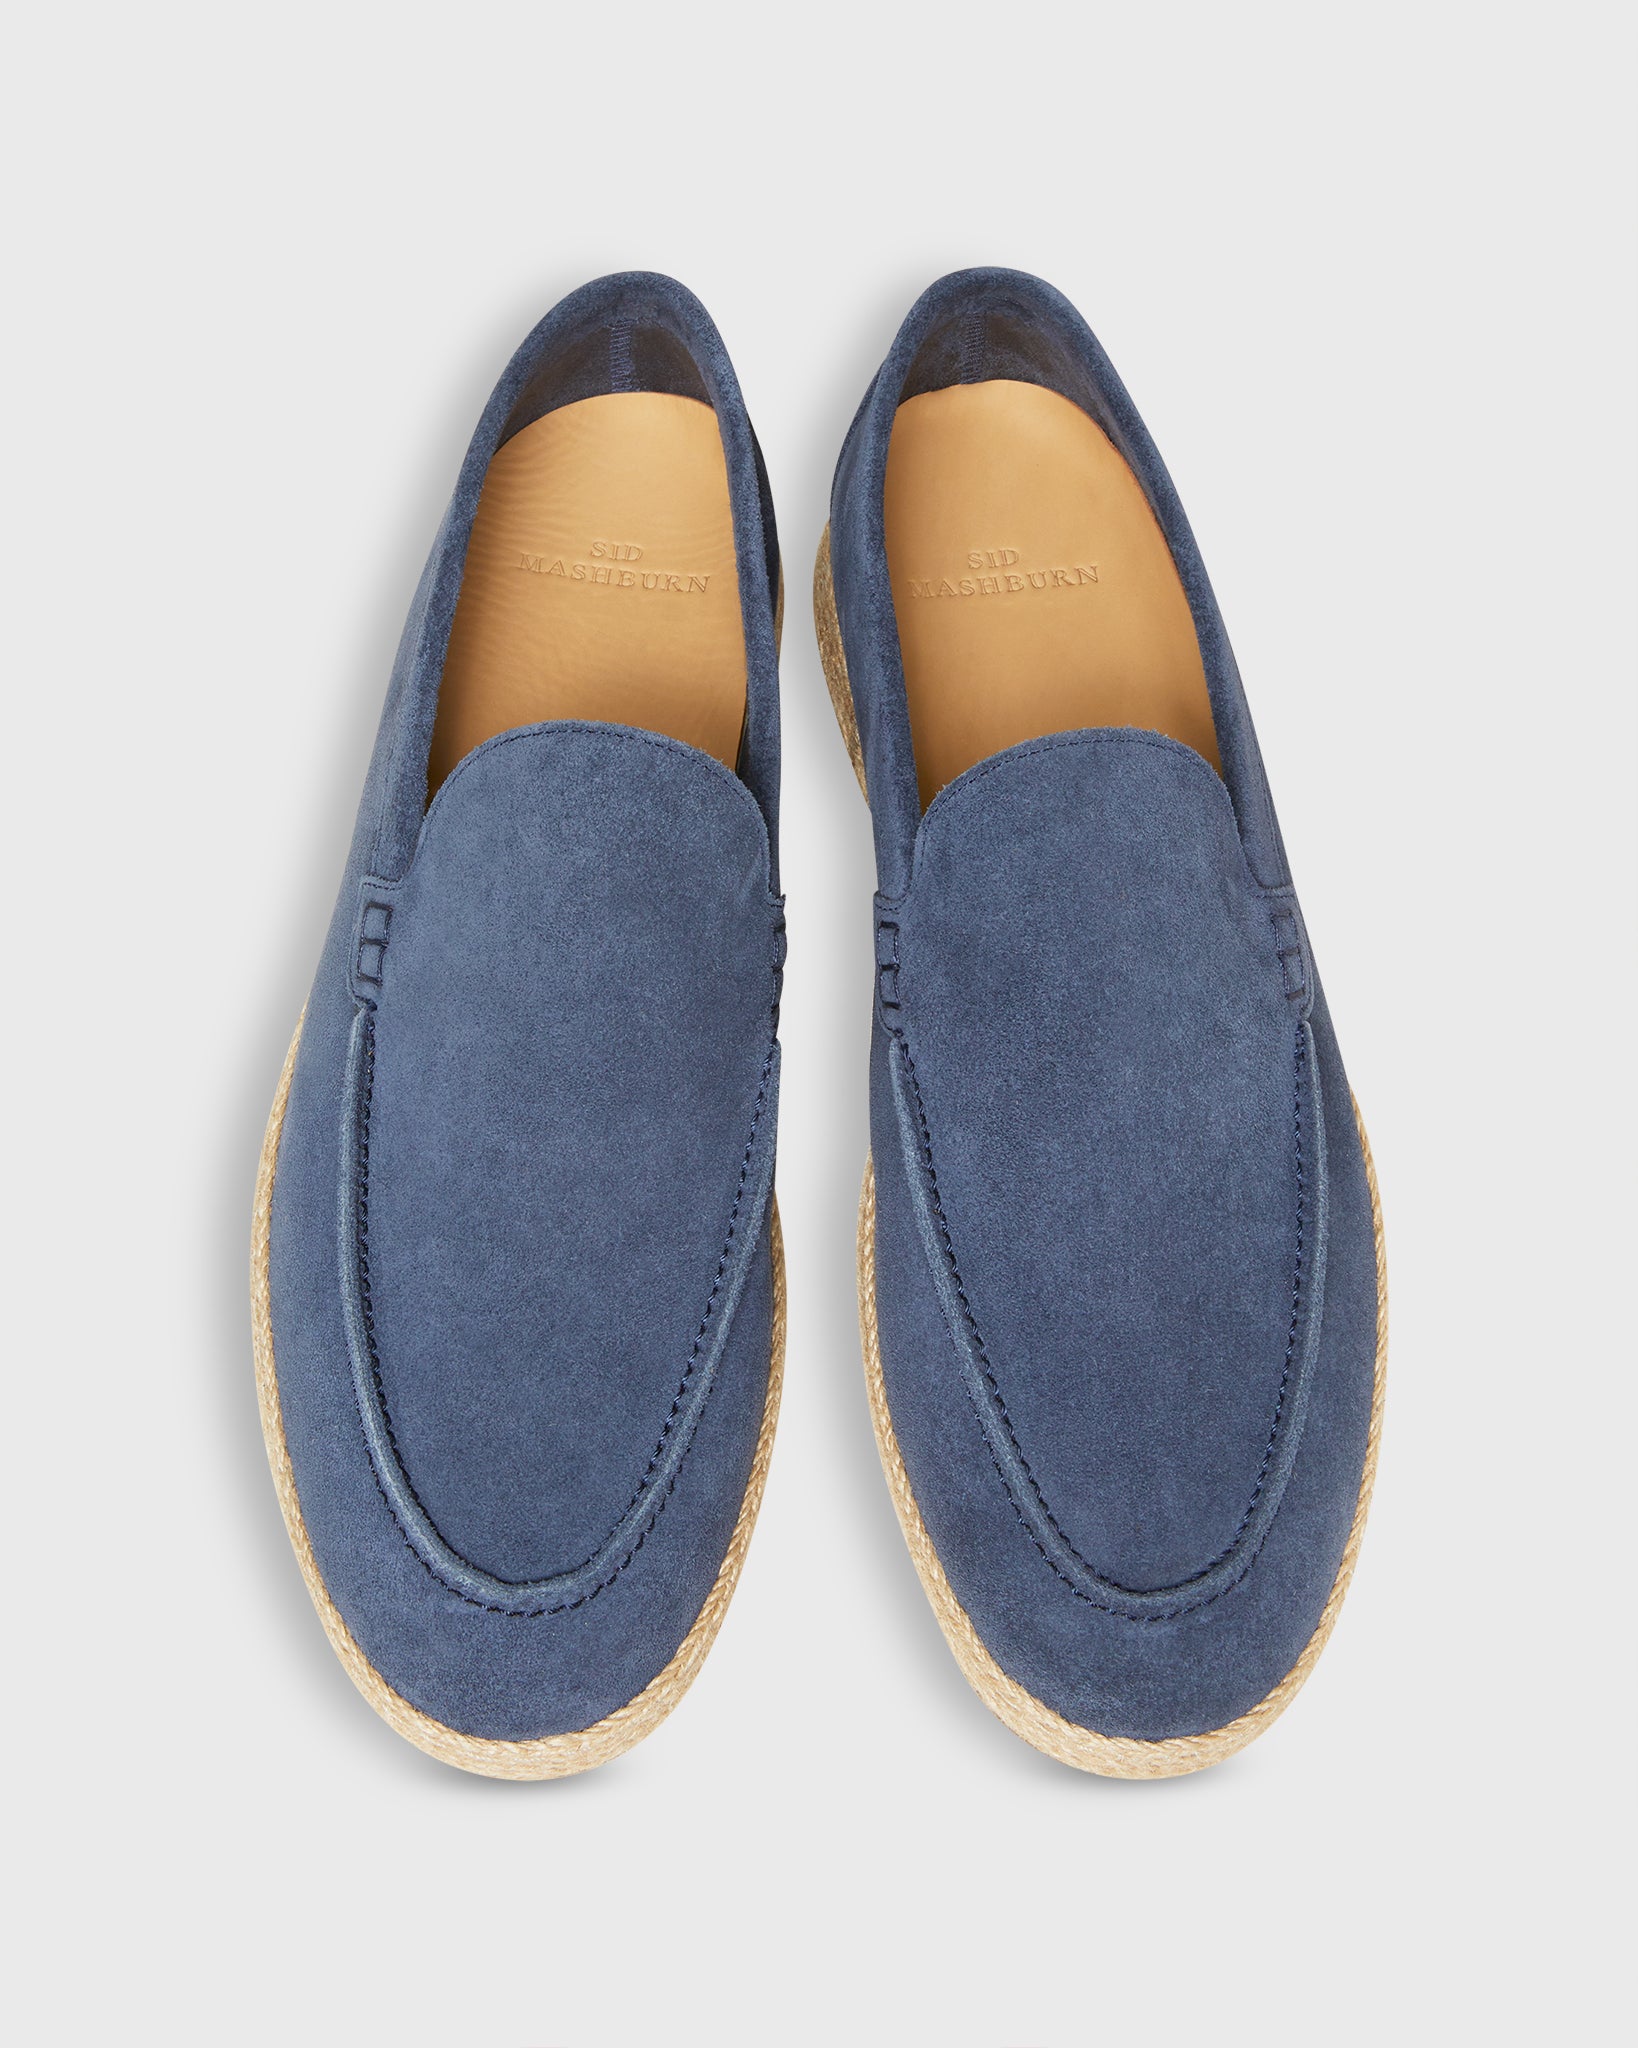 Nazare Espadrille in Pacific Blue Suede